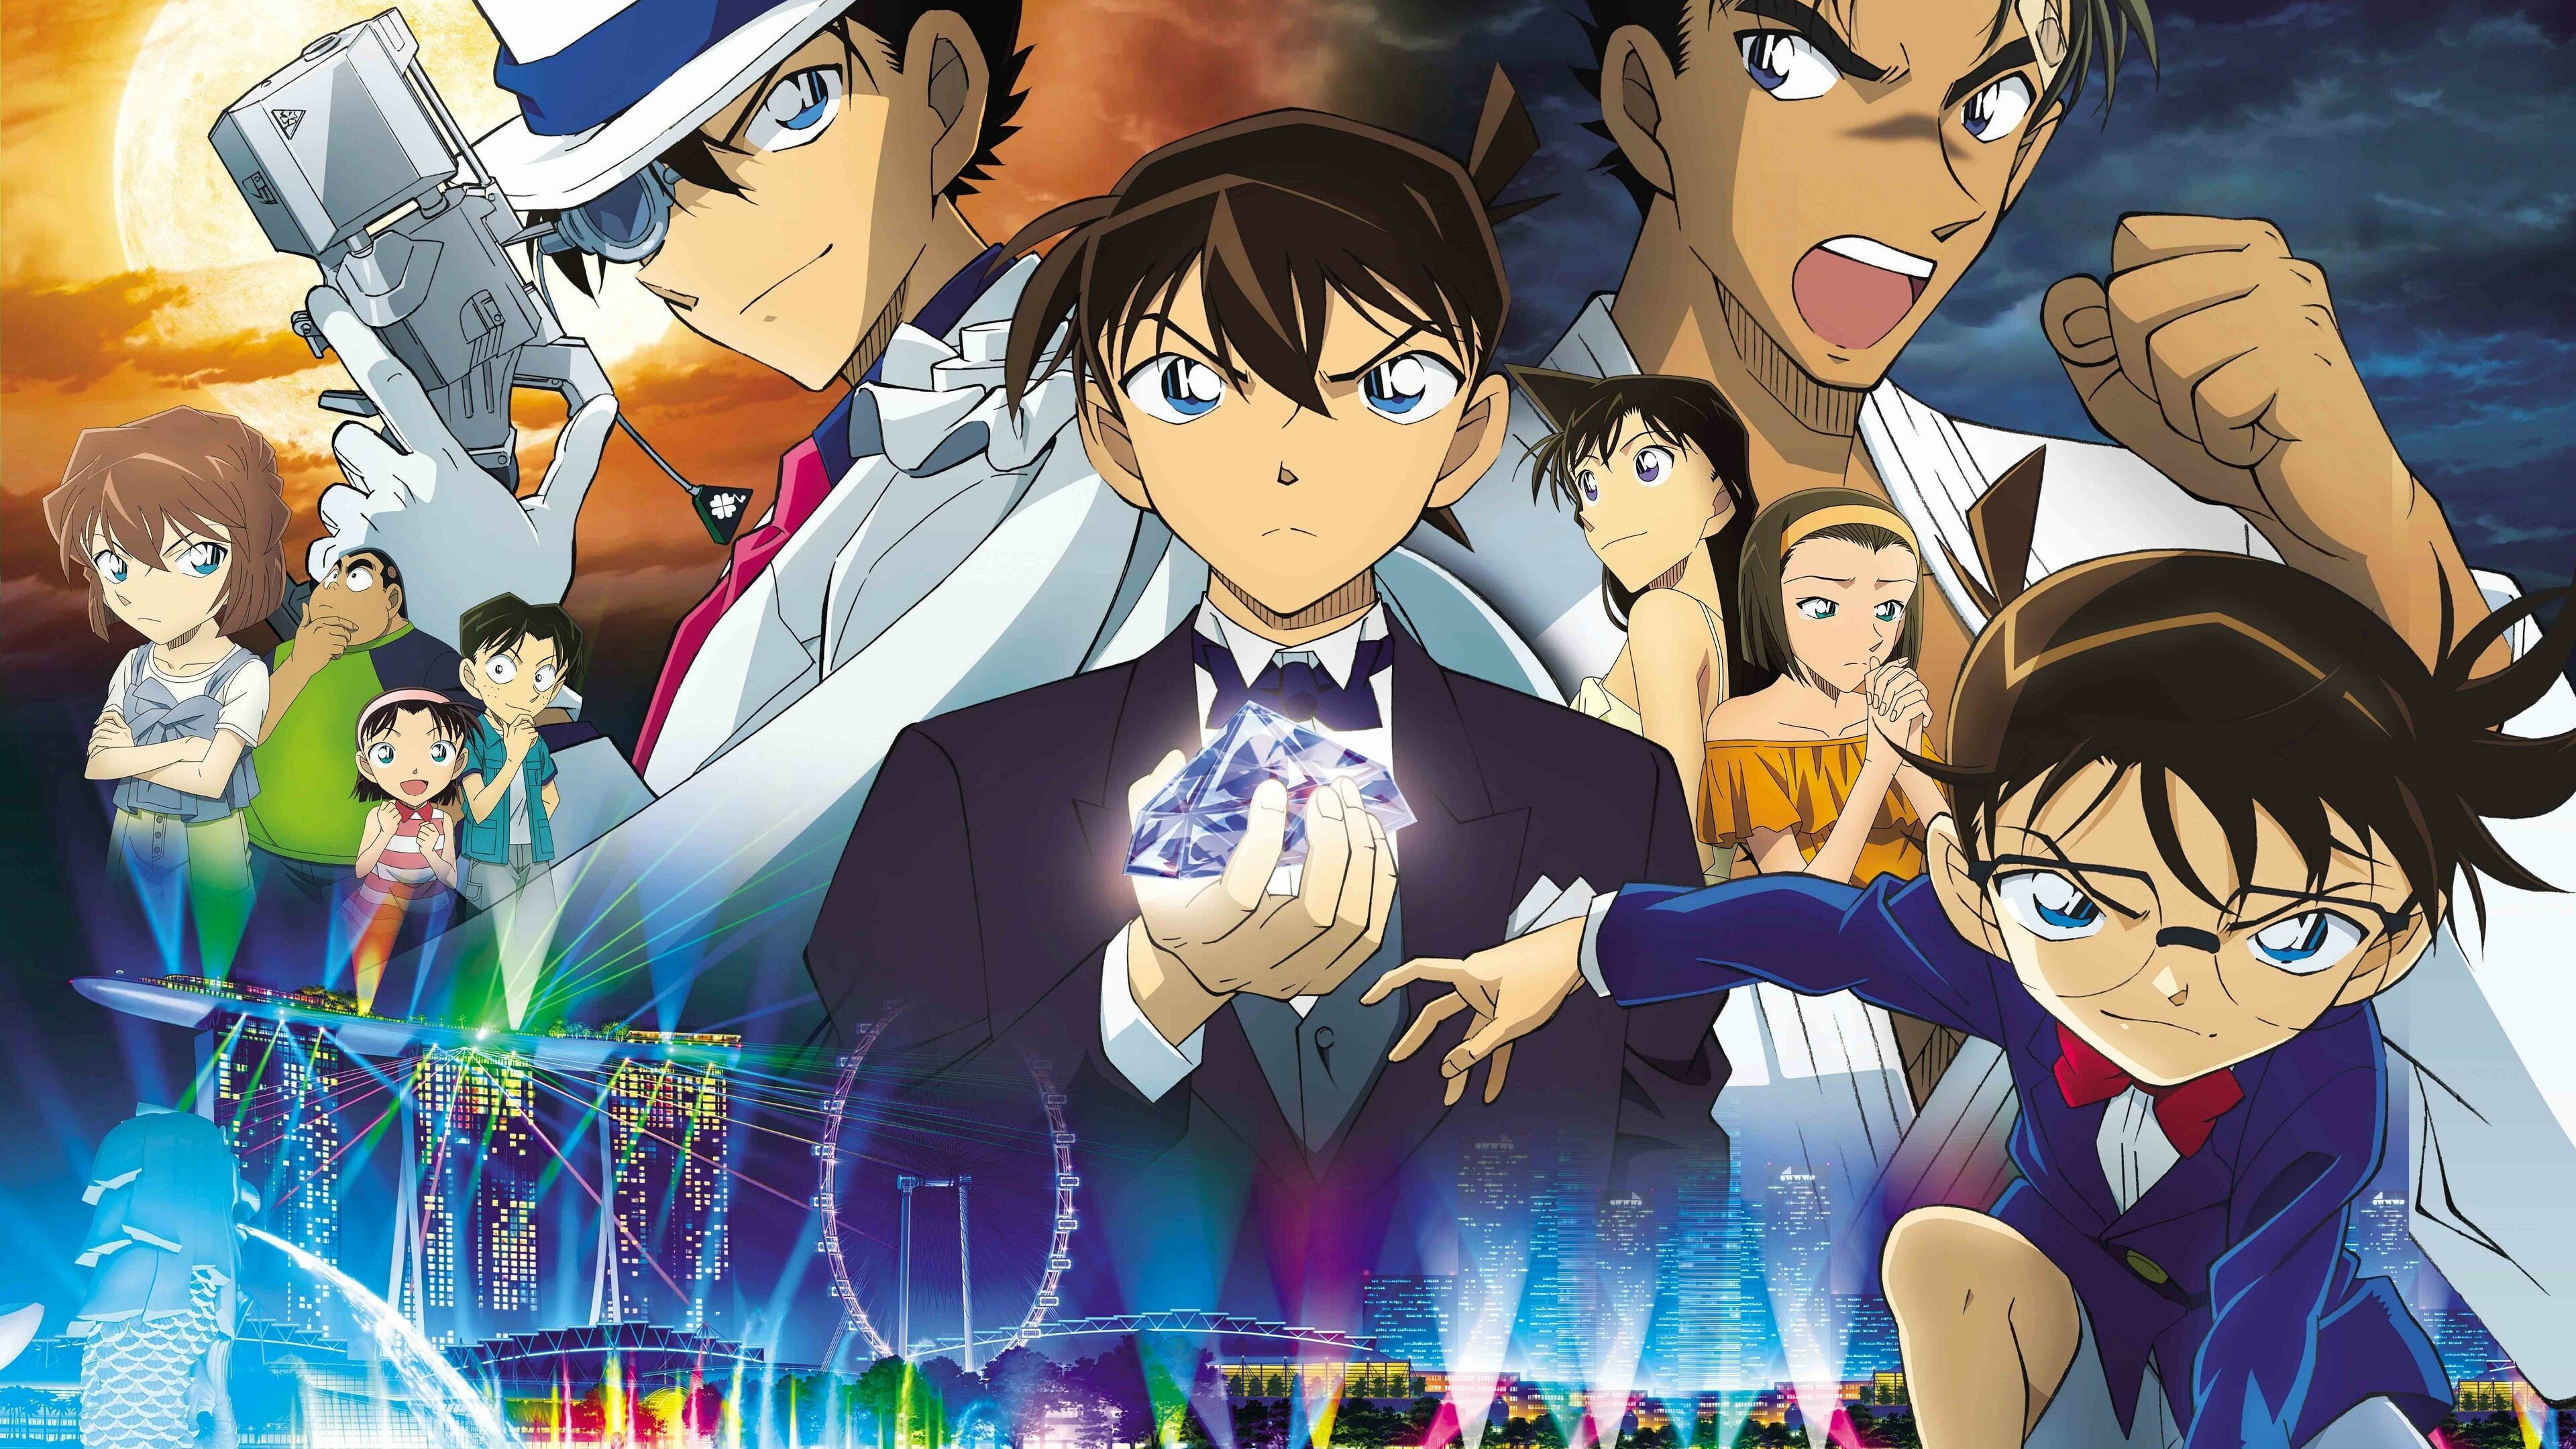 Detective Conan: Produced by Yomiuri Telecasting Corporation and TMS Entertainment. 3840x2160 4K Wallpaper.